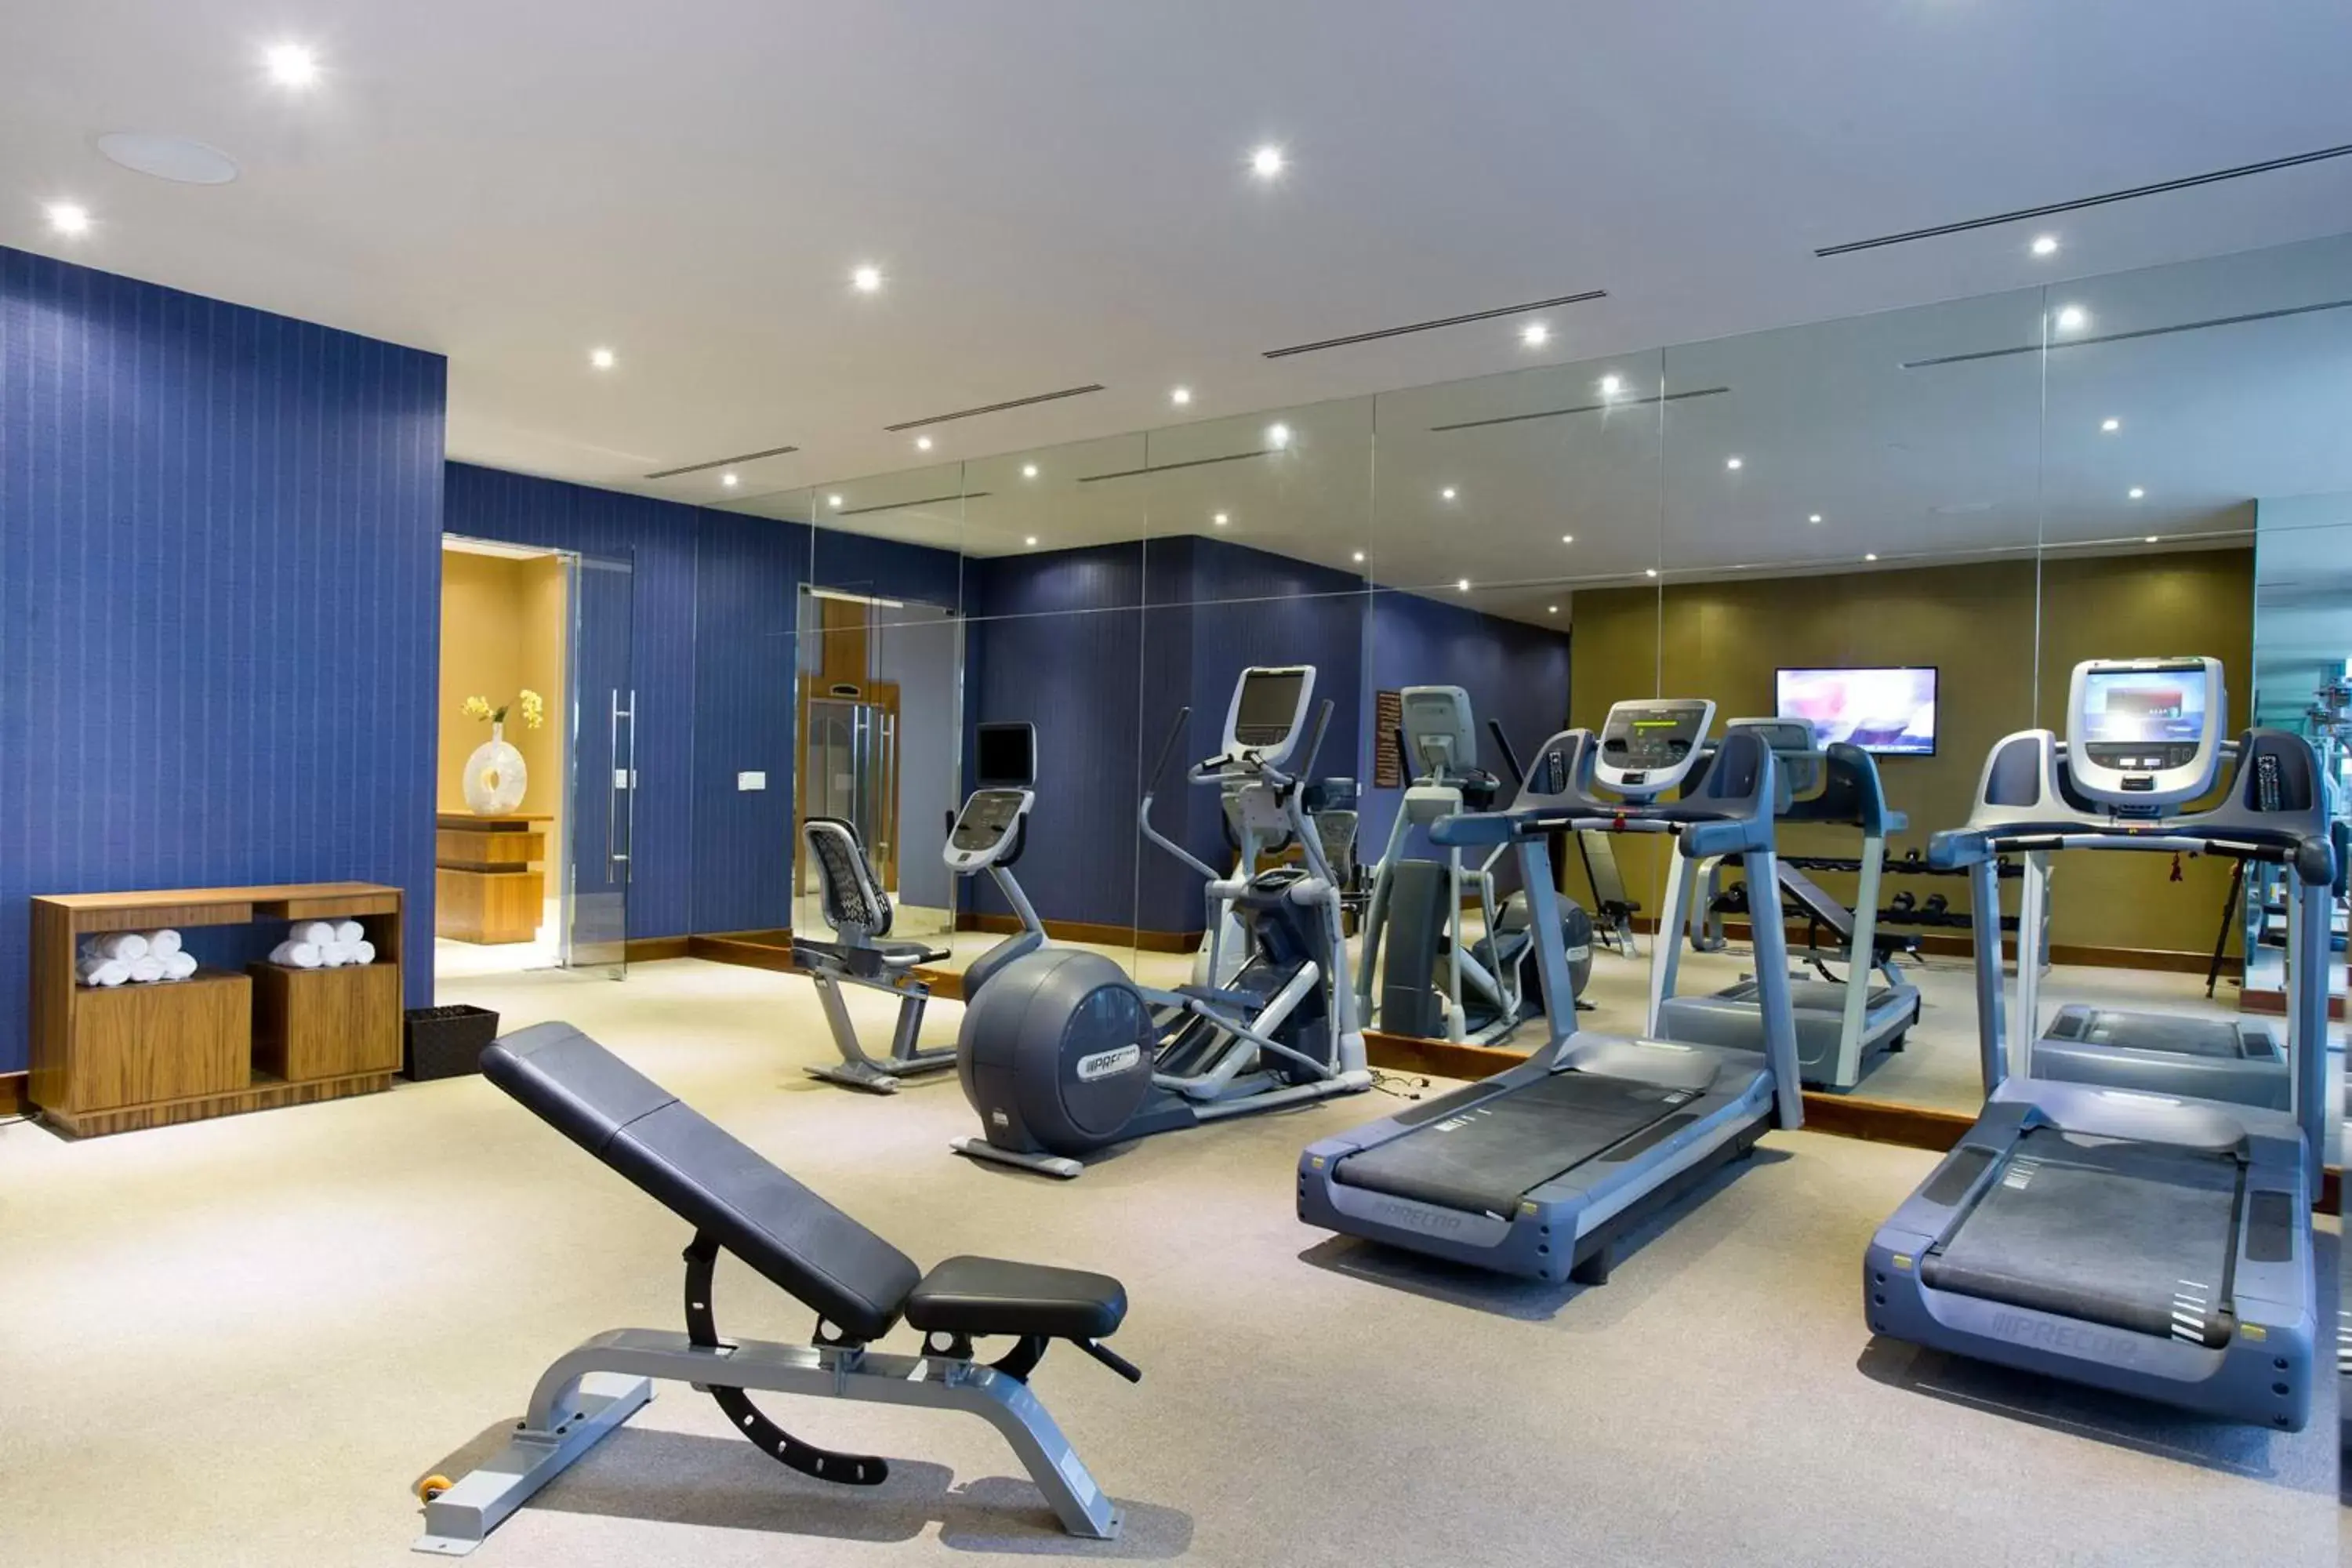 Fitness centre/facilities, Fitness Center/Facilities in Global Hotel Panama